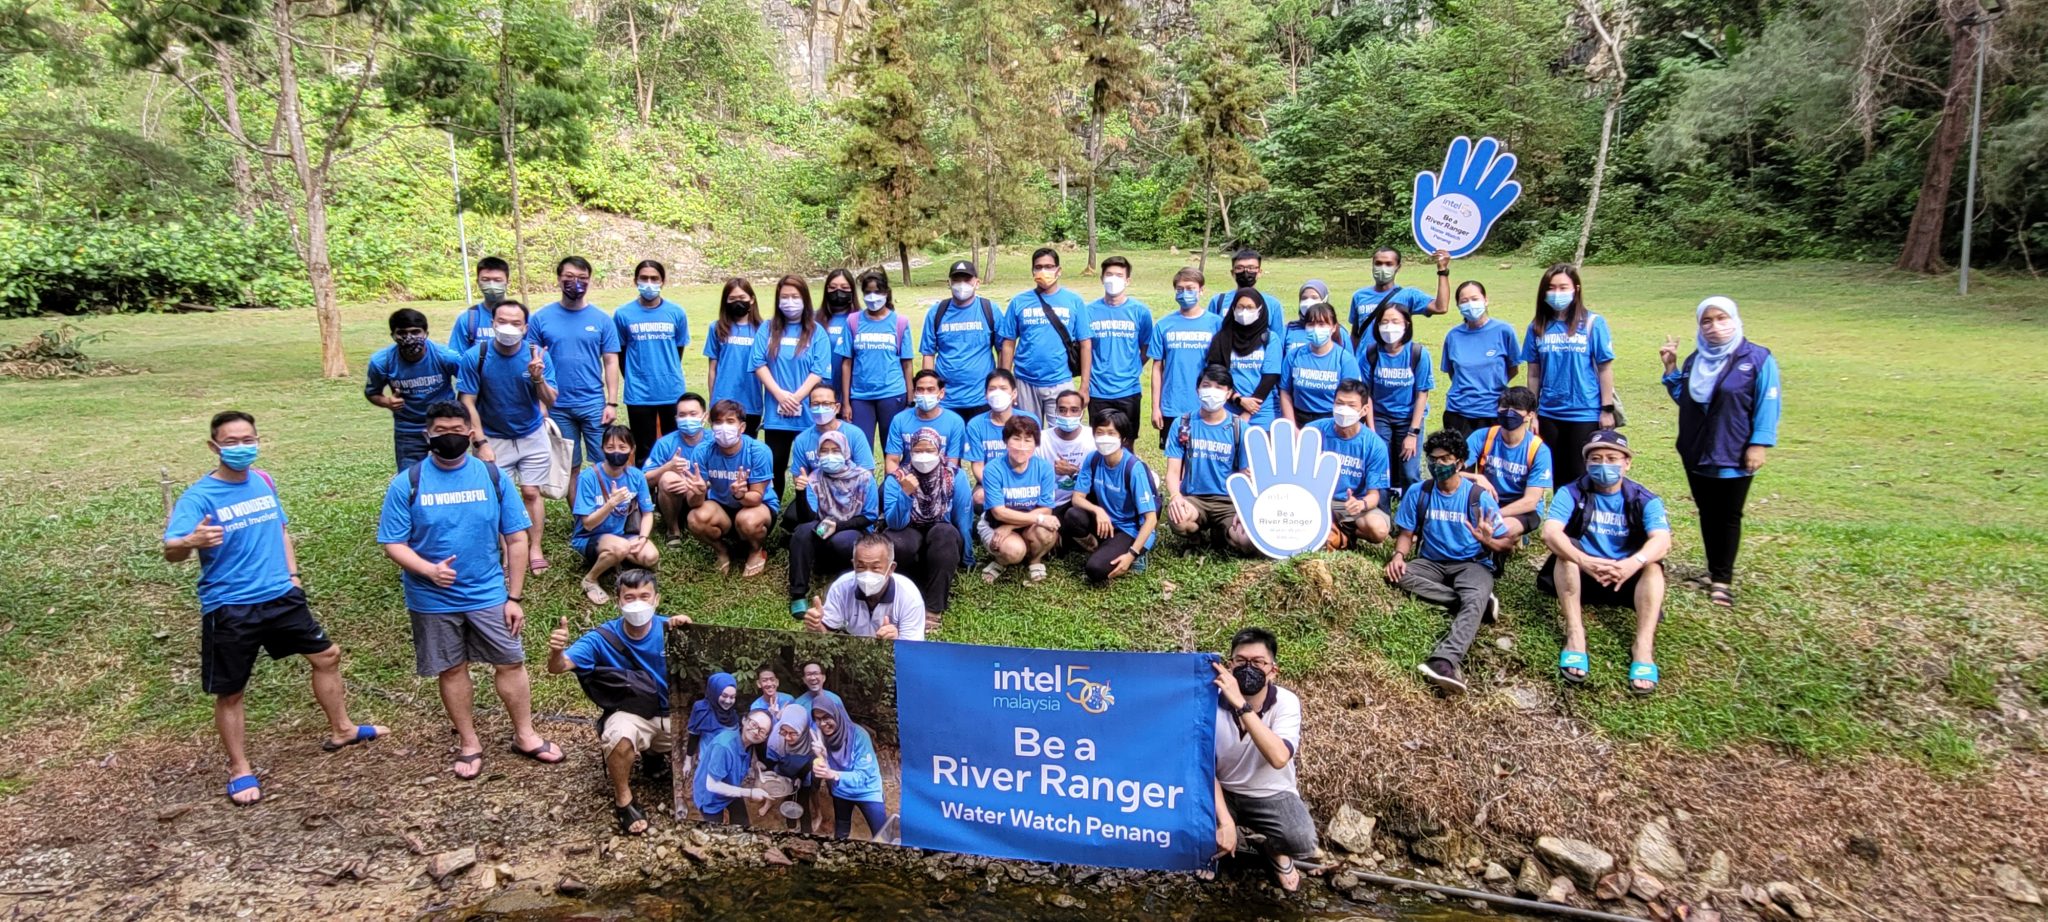 INTEL CSR PROGRAMME WITH WATER WATCH PENANG 28 JUNE 2022, QUARRY PARK